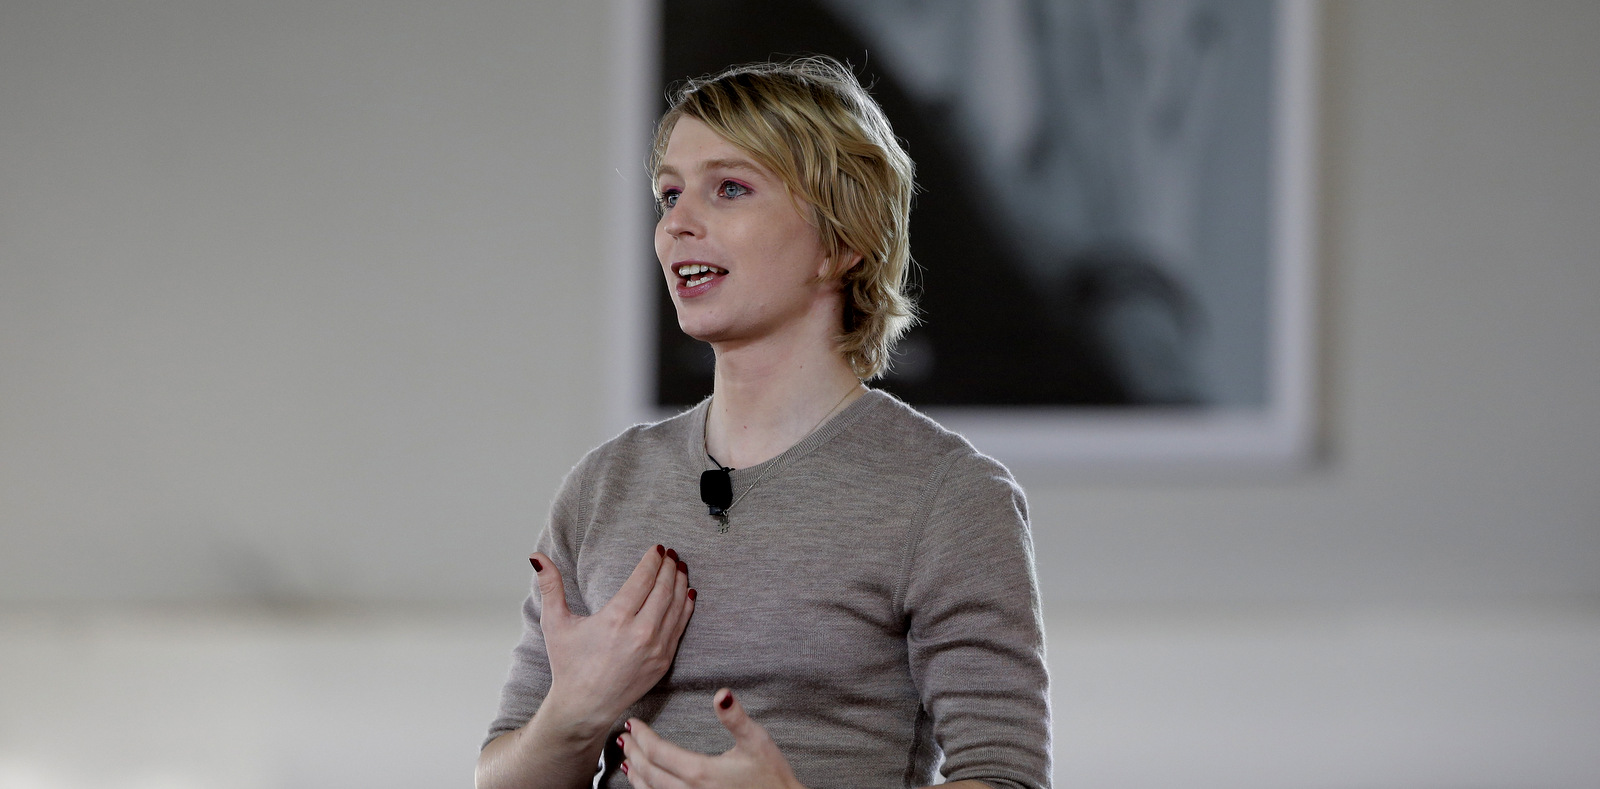 Chelsea Manning addresses an audience, Sept. 17, 2017, during a forum, in Nantucket, Mass. The forum was part of The Nantucket Project's annual gathering on the island of Nantucket. Manning is a former U.S. Army intelligence analyst who spent time in prison for sharing classified documents. (AP/Steven Senne)